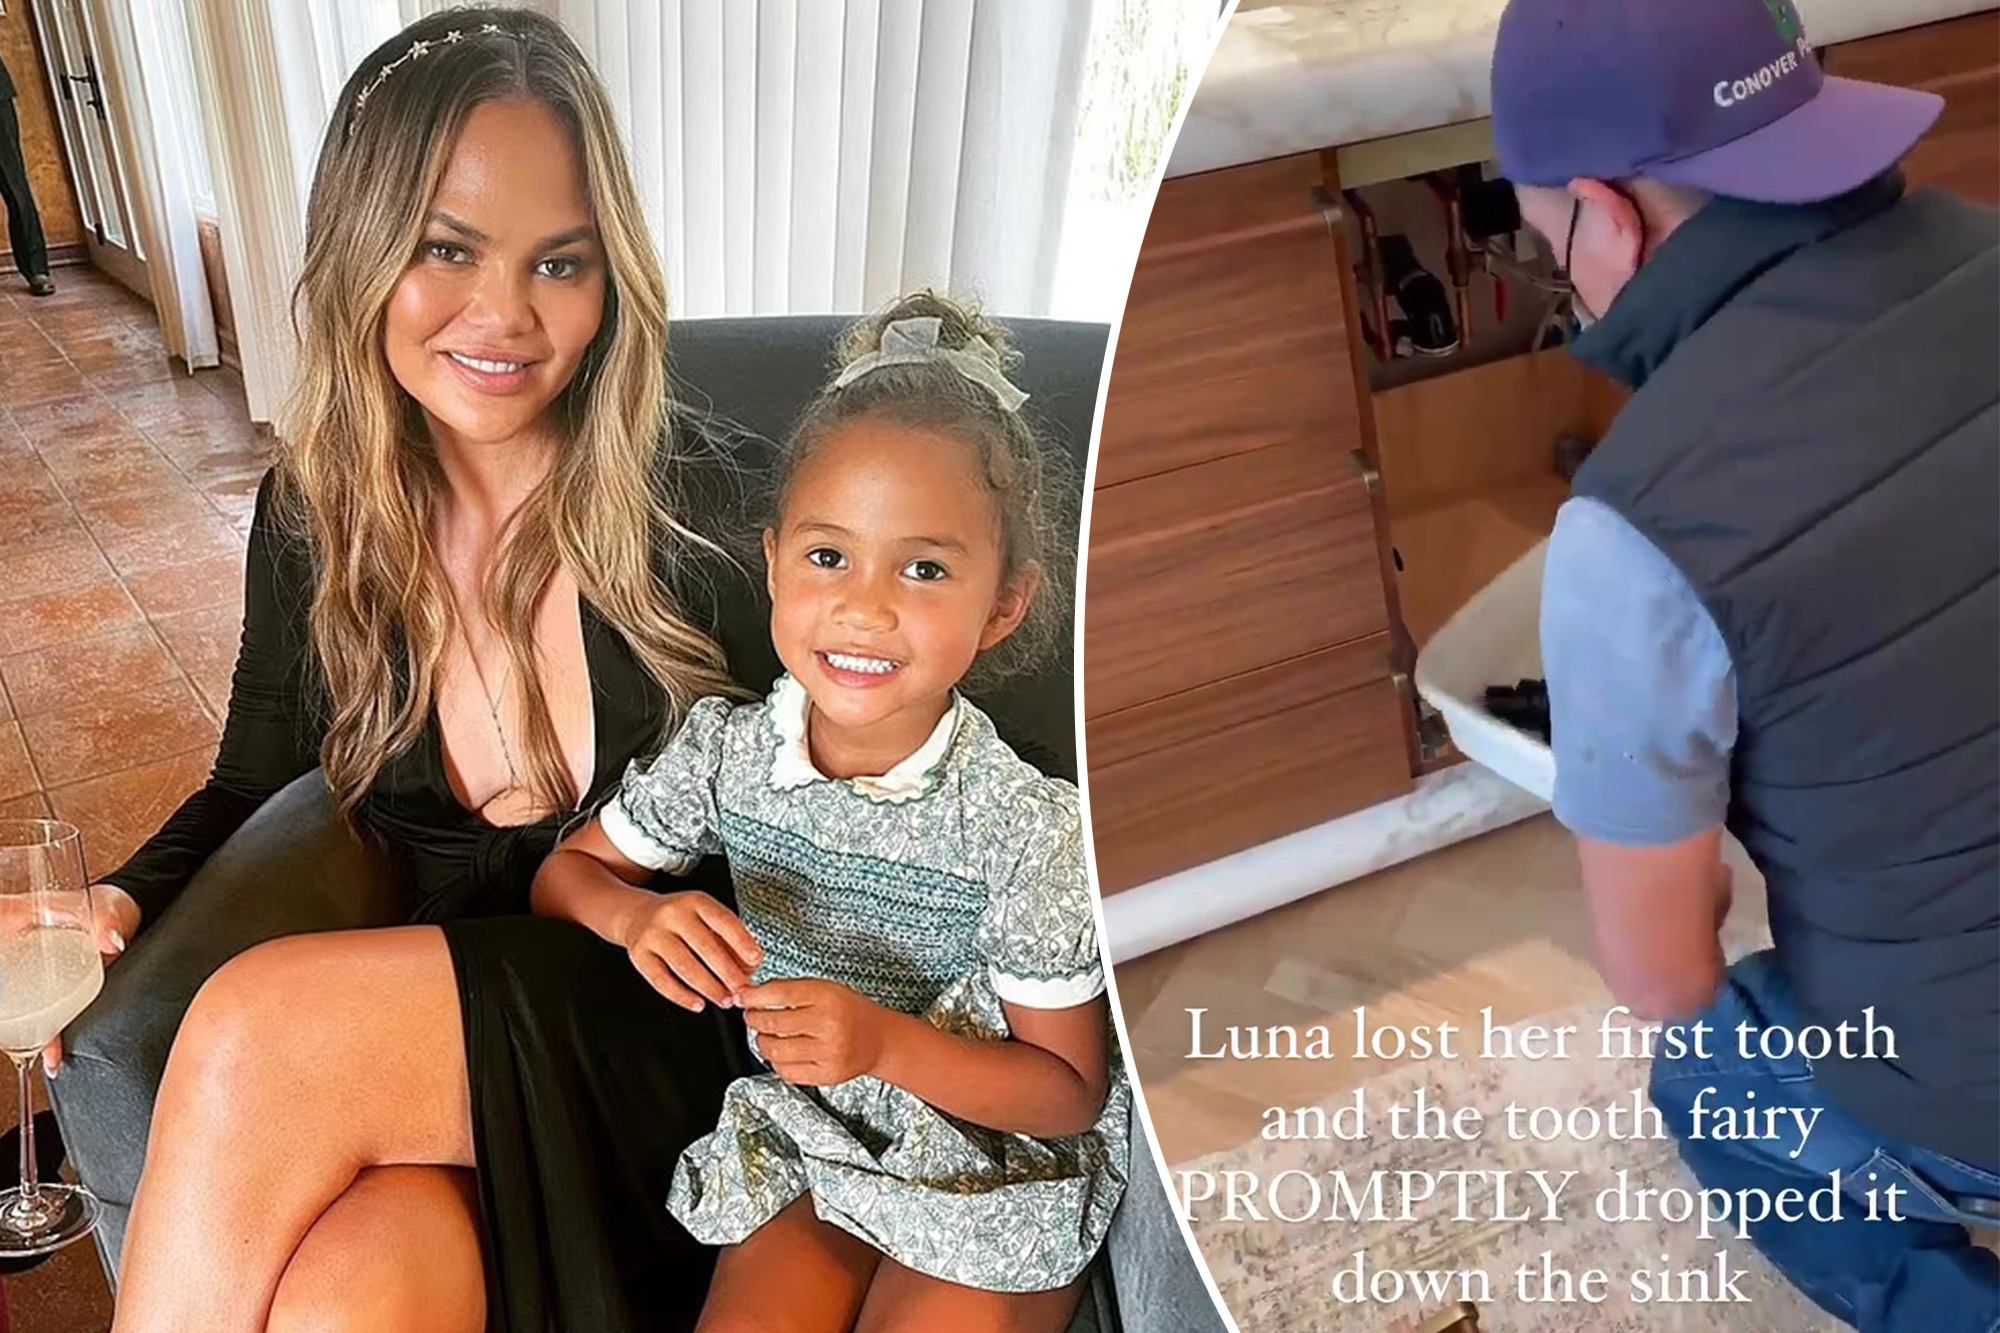 Chrissy Teigen calls plumber to retrive her child’s lost tooth